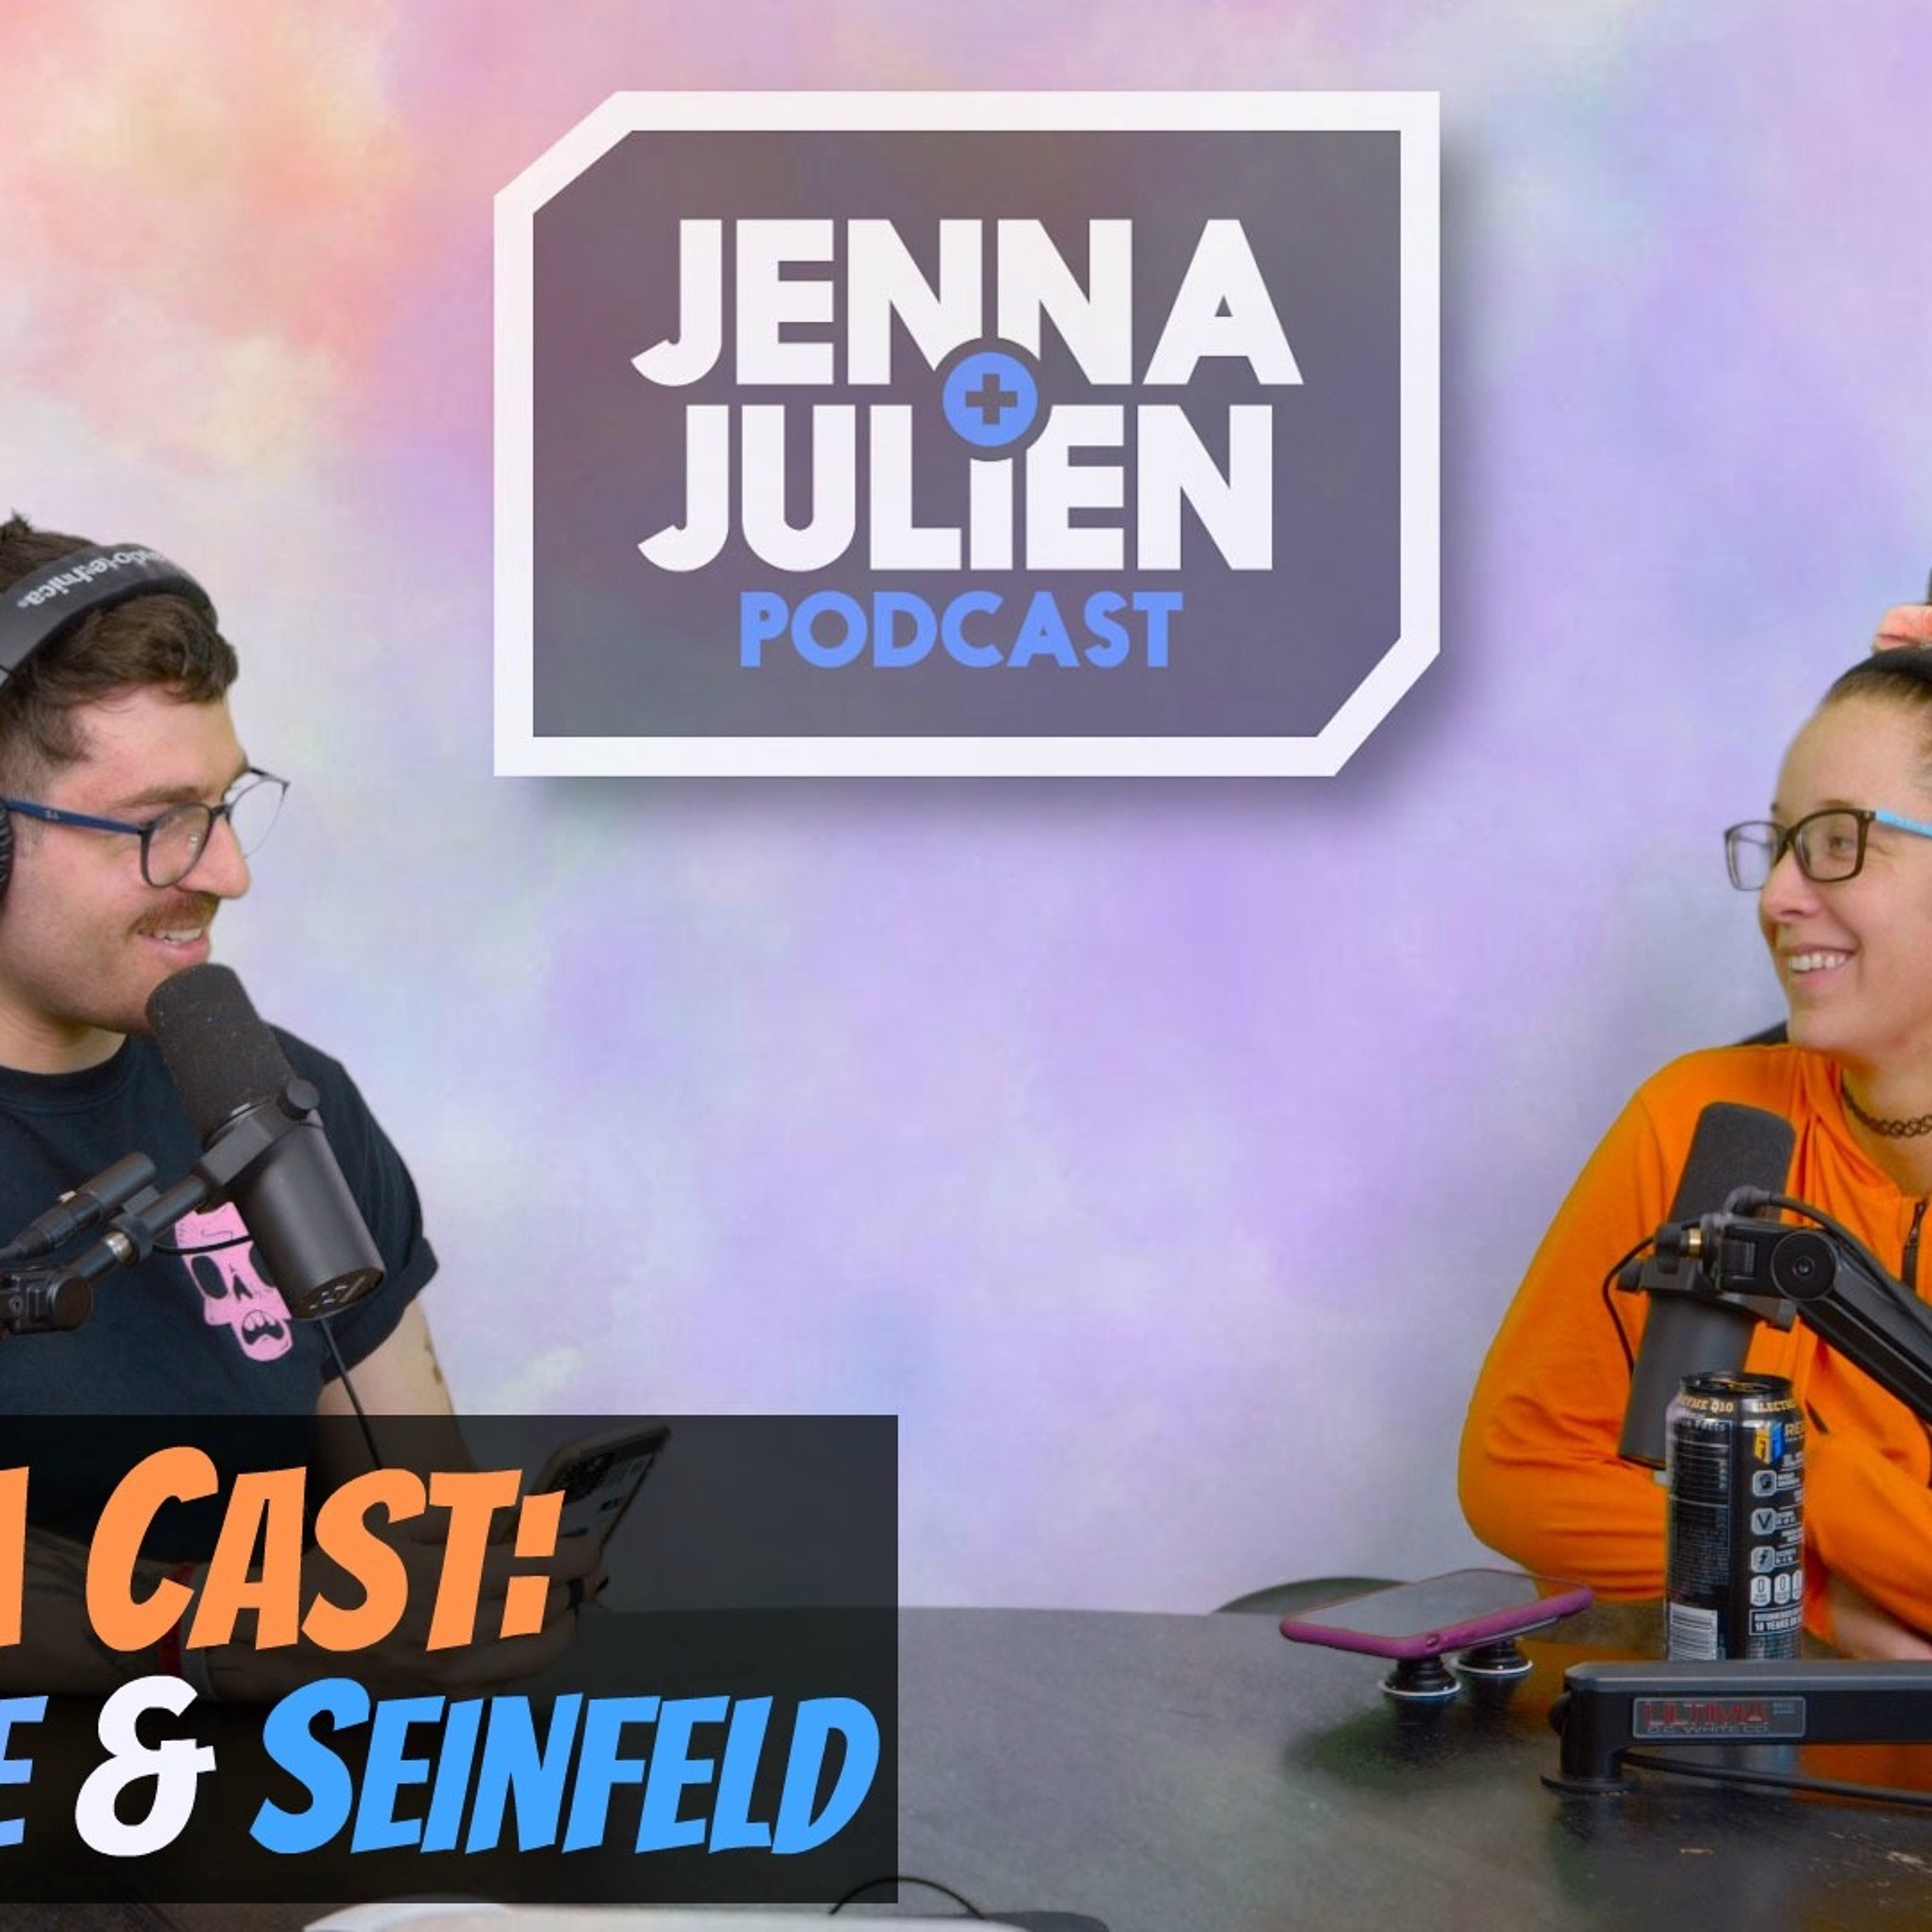 Podcast #277 - Trivia Cast: The Office & Seinfeld